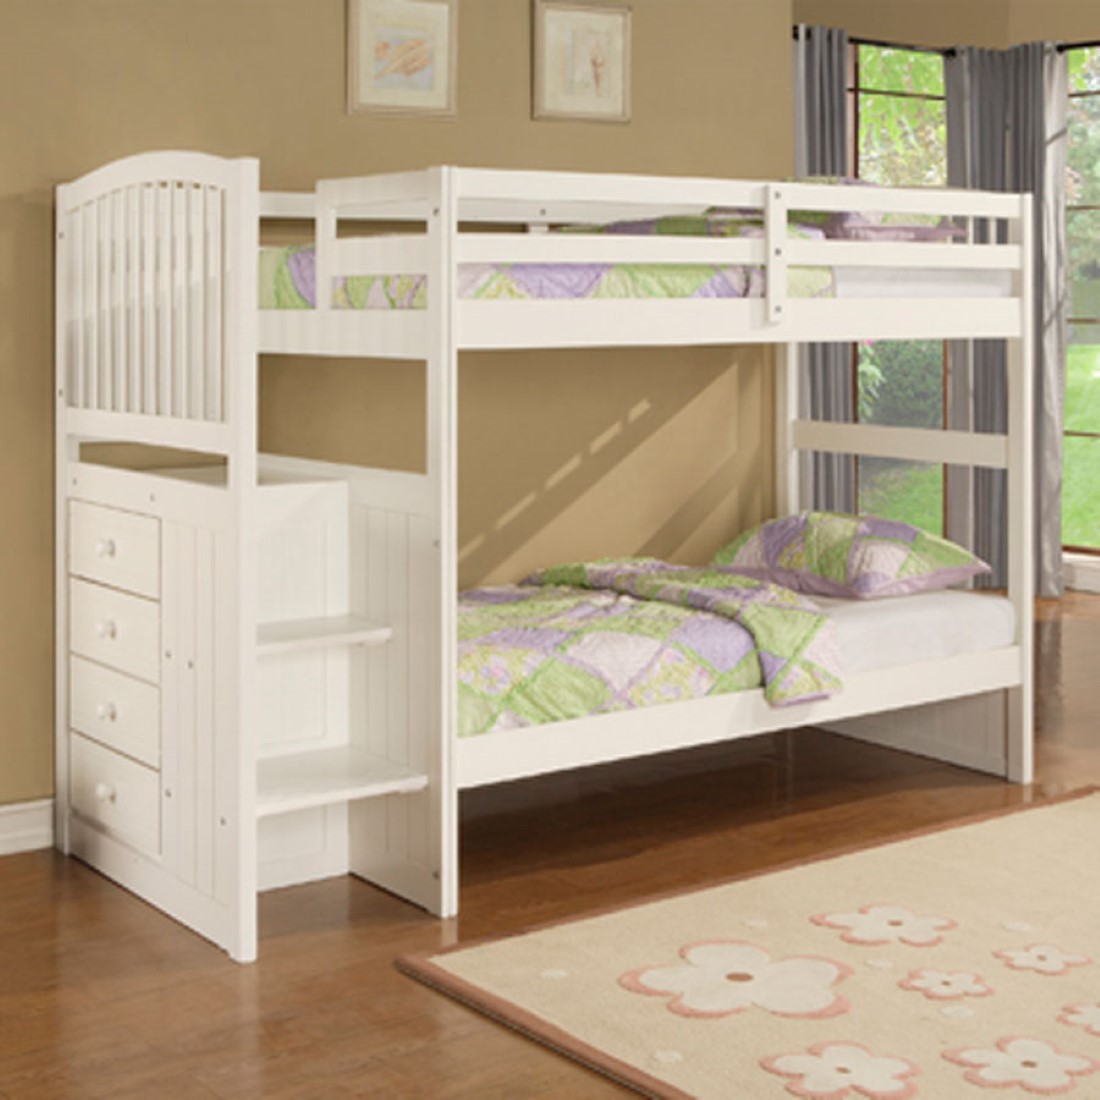 White Twin Design Solid White Twin Loft Bed Design With Beautiful Pattern Rug Ideas And Simple Storage Design With Four Drawers Kids Room 30 Functional Twin Loft Bed Design Furniture With Desk For Kids